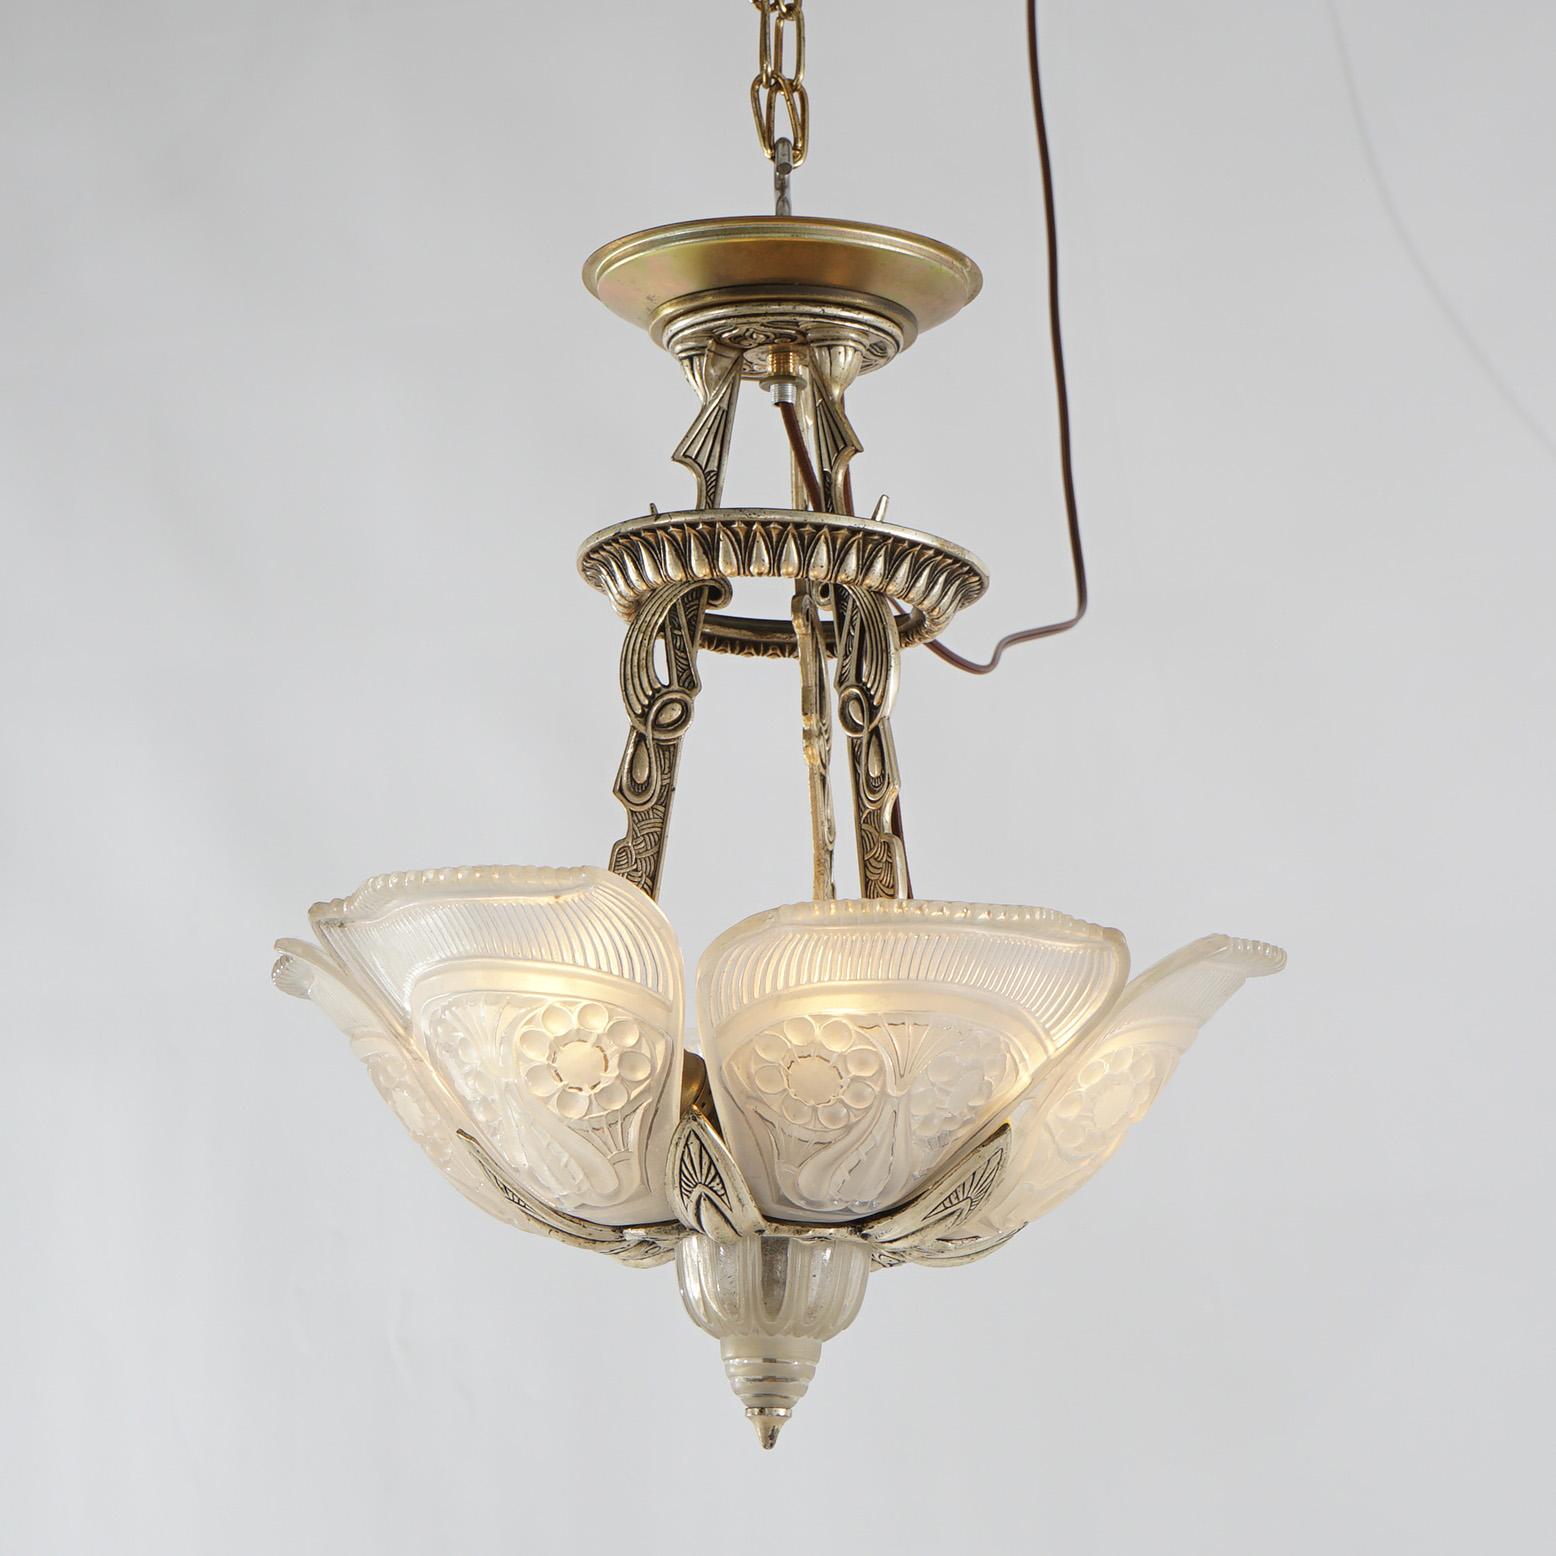 20th Century Antique Art Deco Slip Shade Hanging Light with Opalescent Pressed Glass Shades